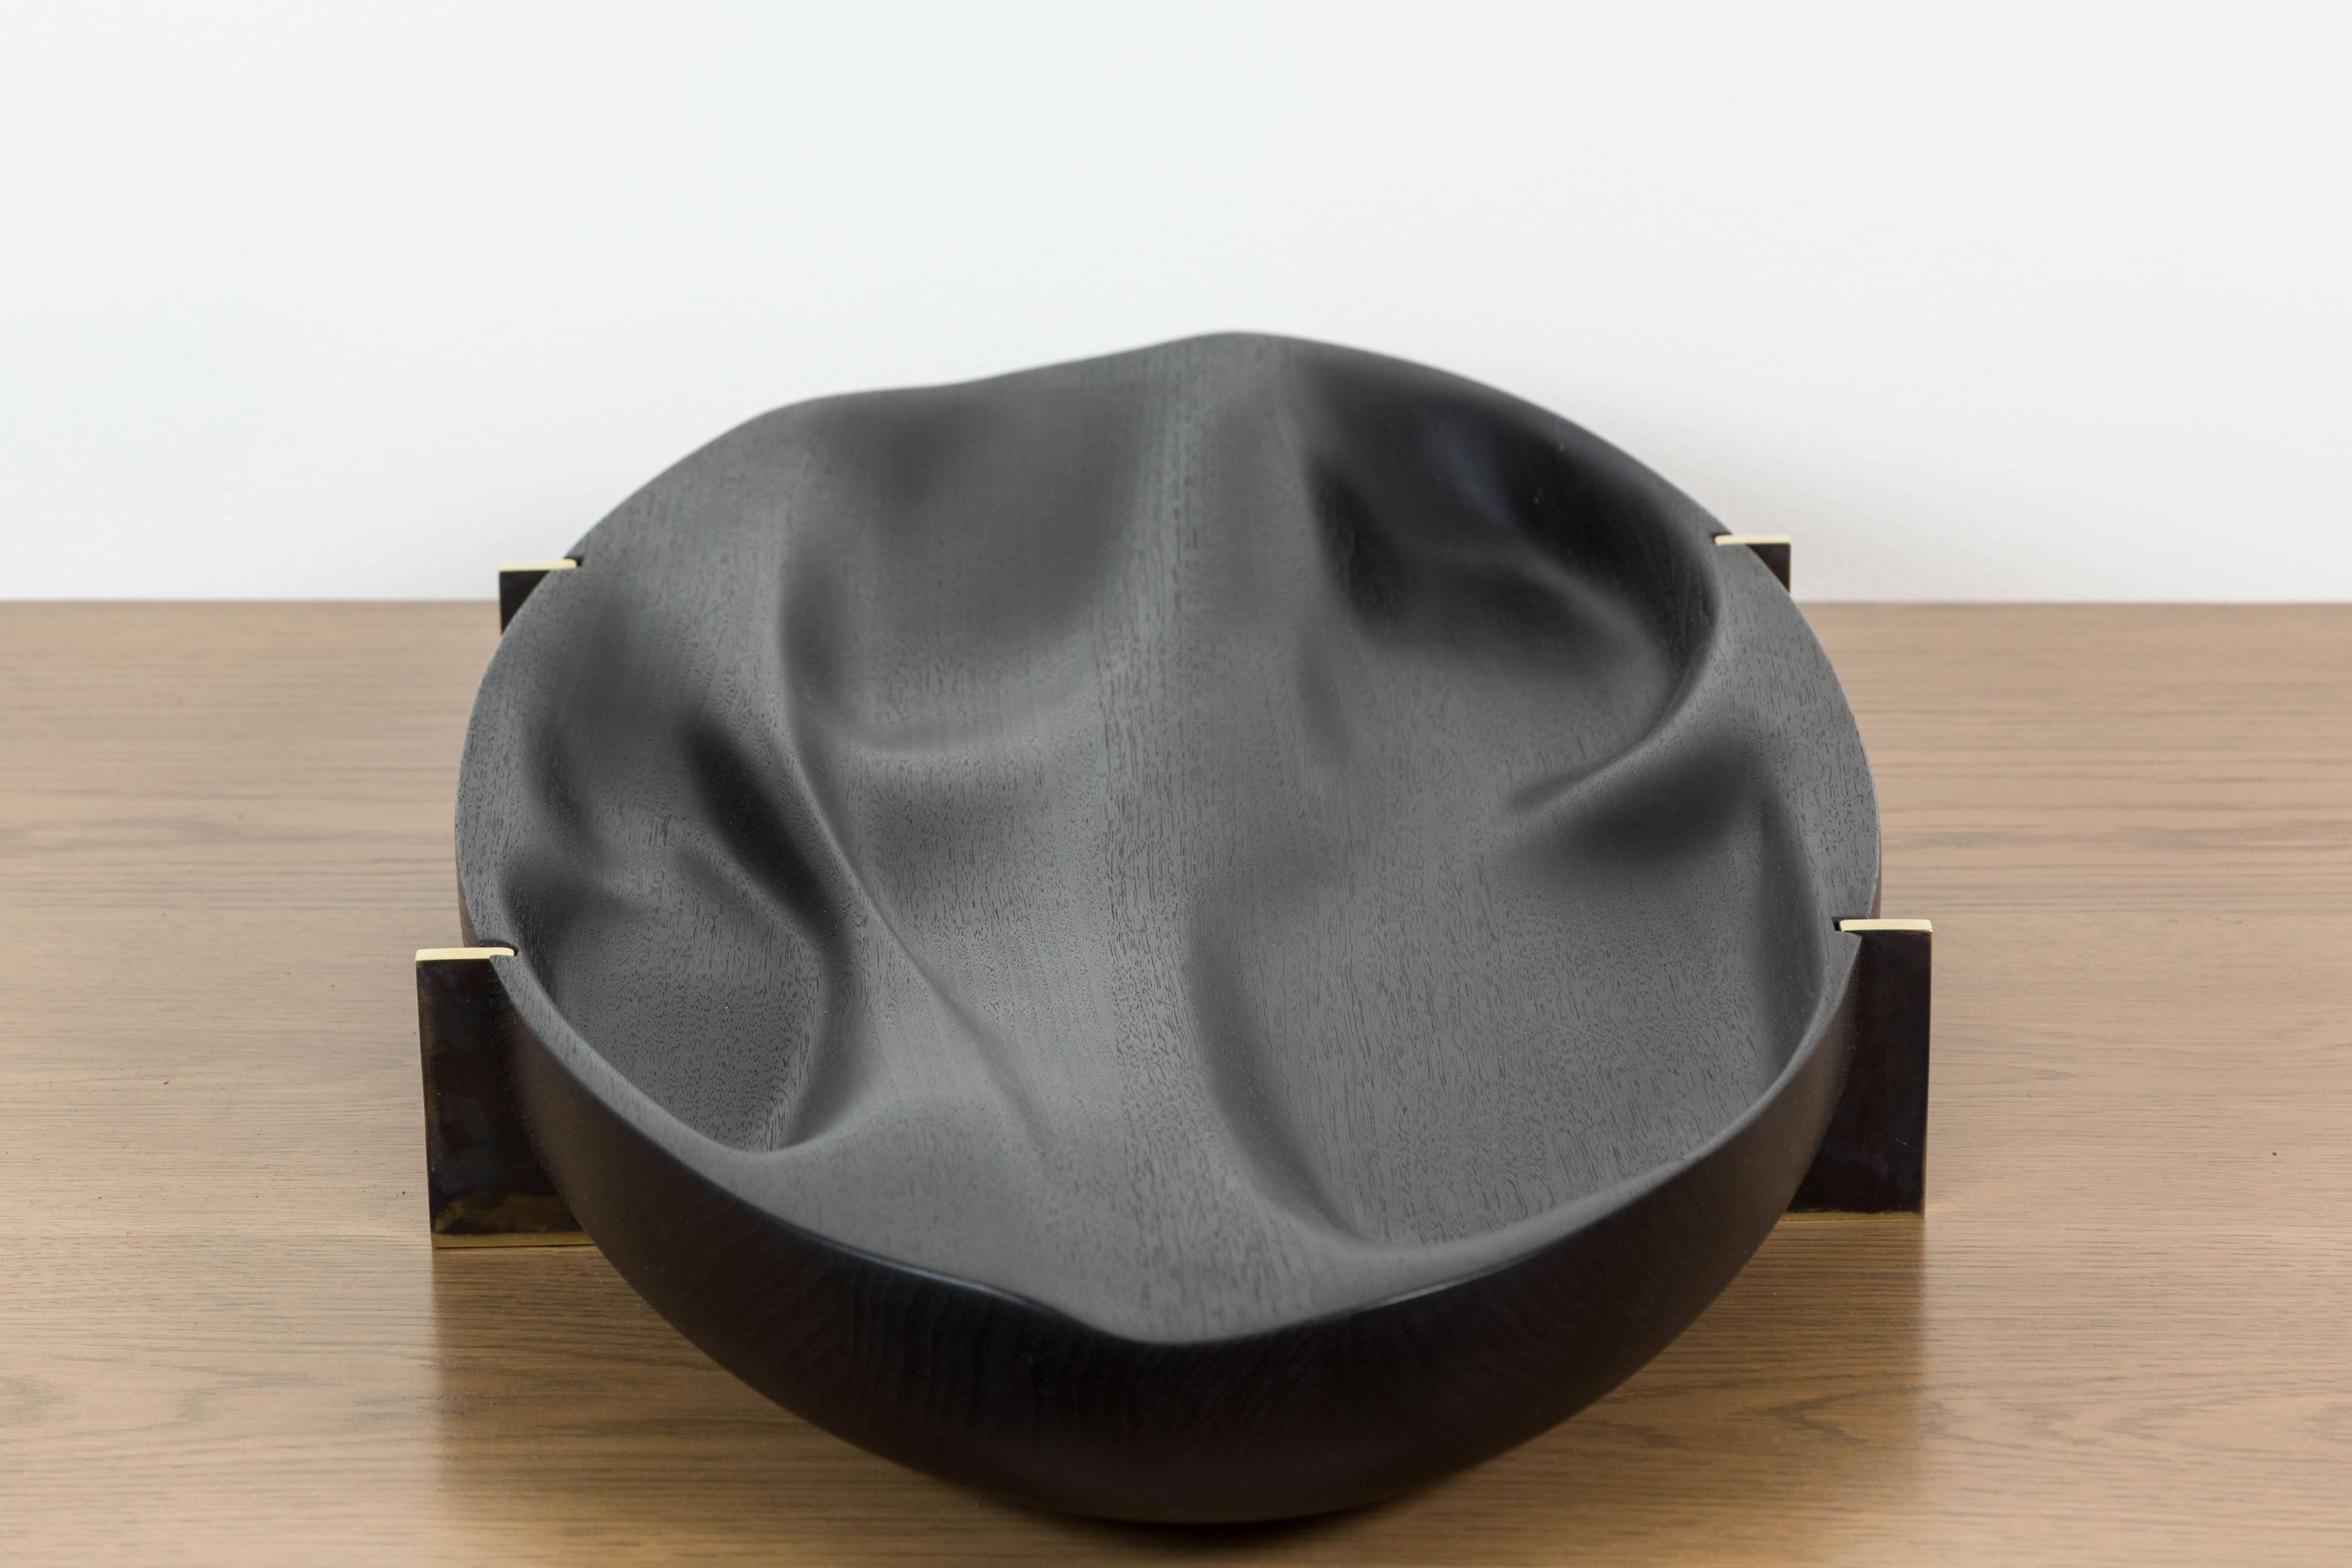 Contemporary Ebonized Walnut and Brass Oval Tray by Vincent Pocsik for Lawson-Fenning